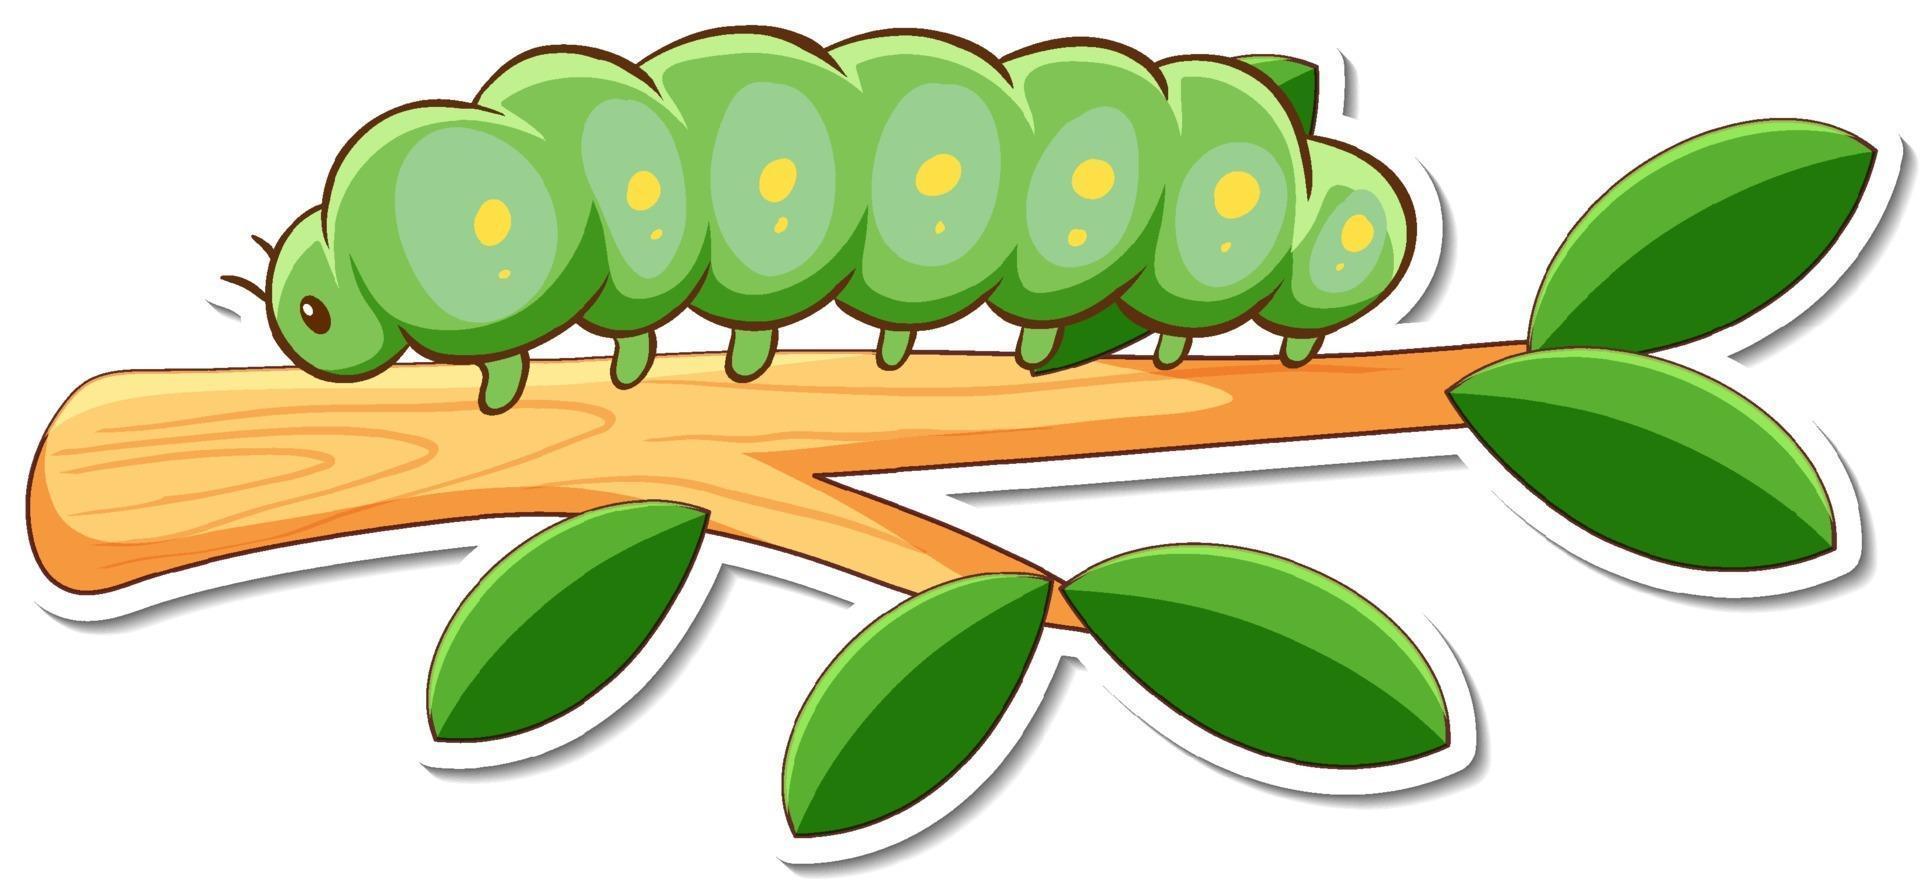 Cartoon character of green worm on a branch sticker vector